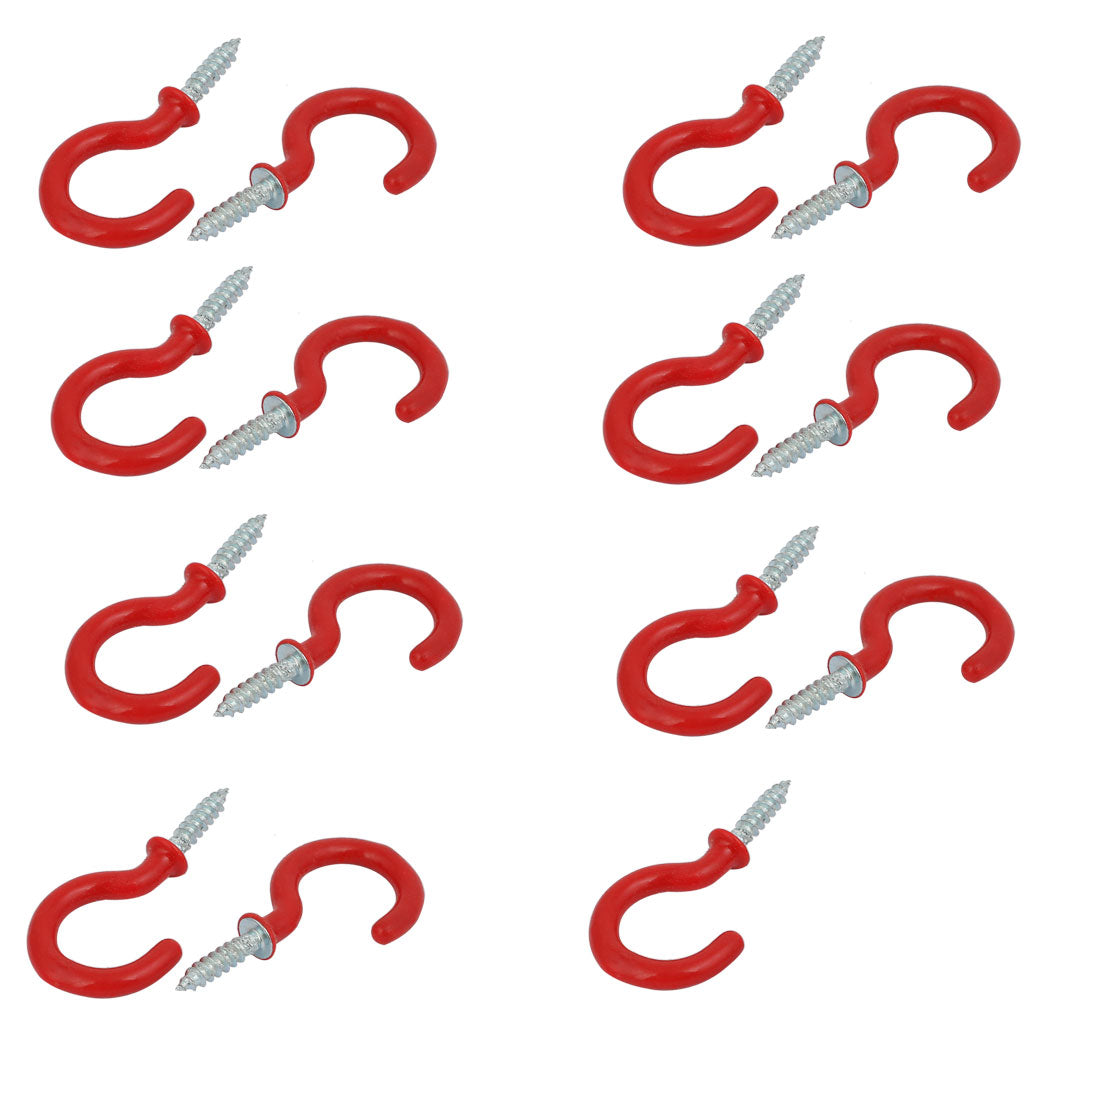 uxcell Uxcell 1 Inch Plastic Coated Screw-in Open Cup Ceiling Hooks Hangers Red 15pcs